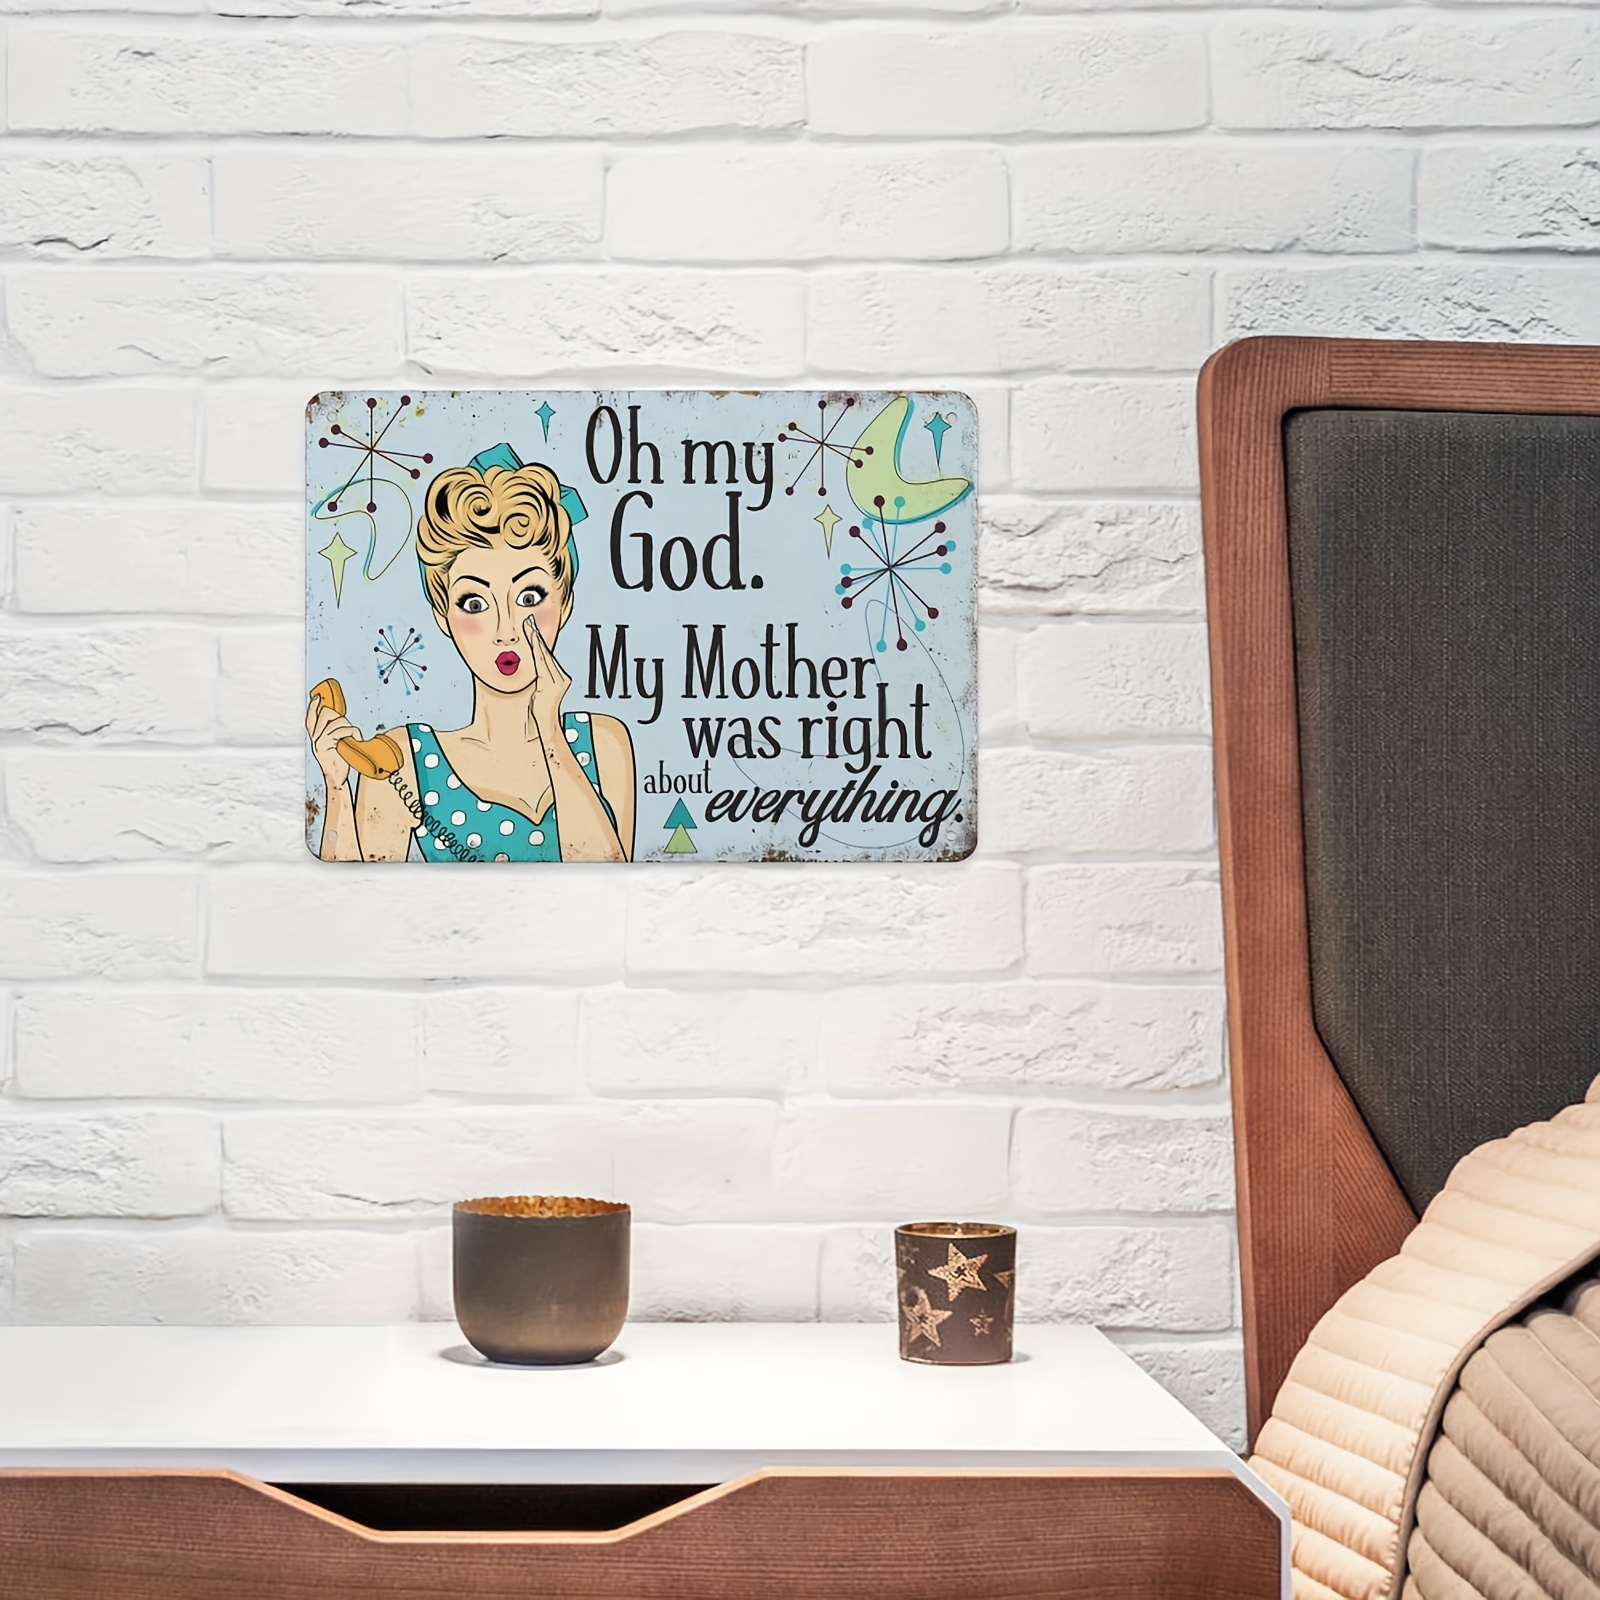 Mom Wall Art Mom Gift Mother's Day Gifts Funny Mom 